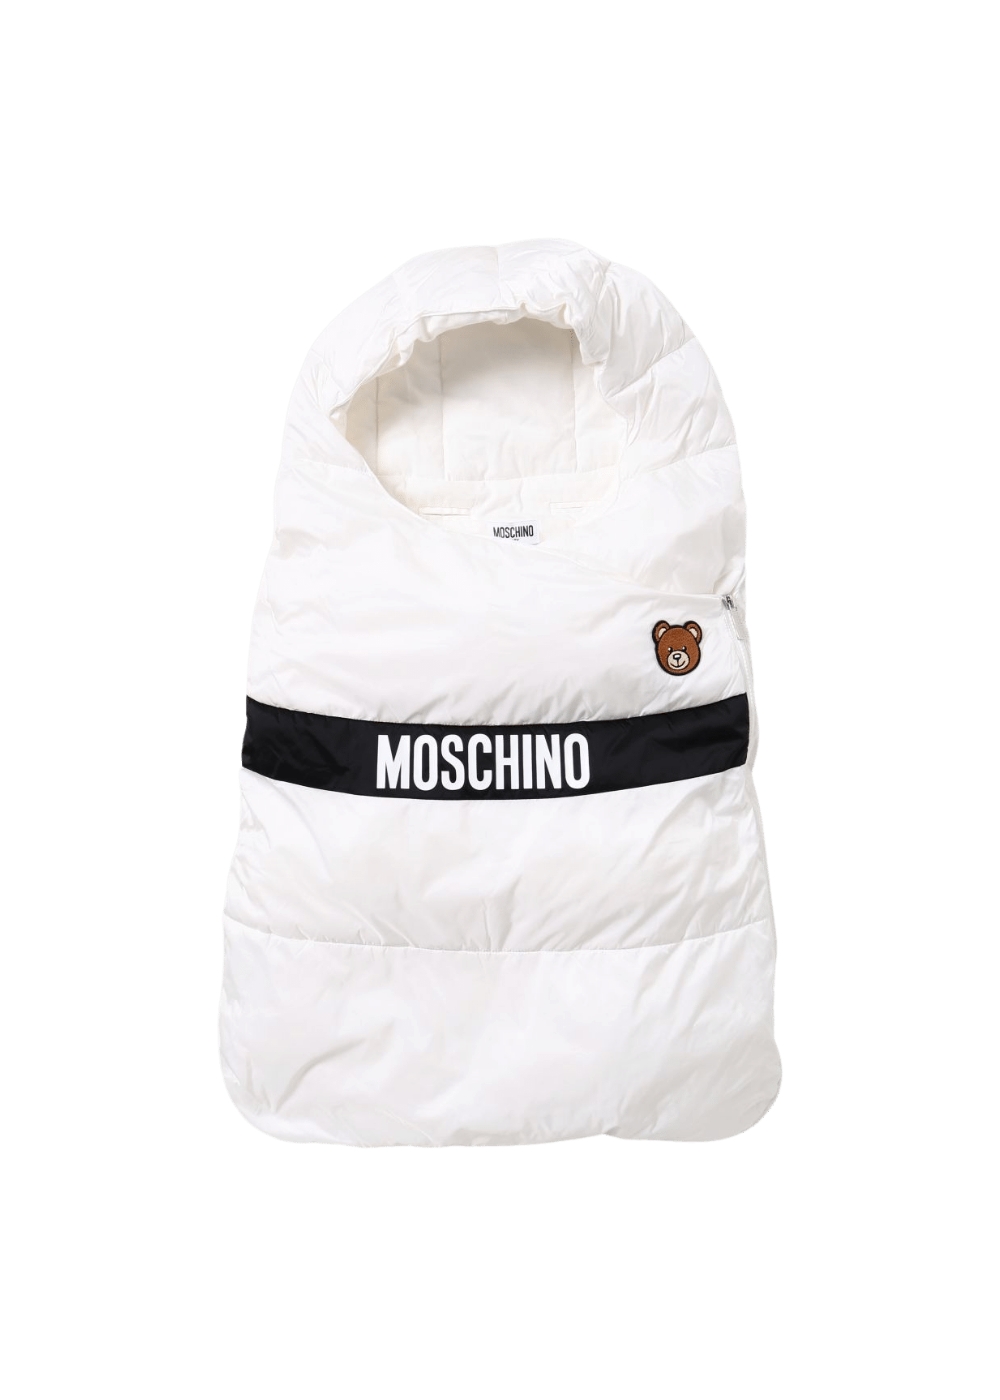 Featured image for “Moschino Sacco Nanna”